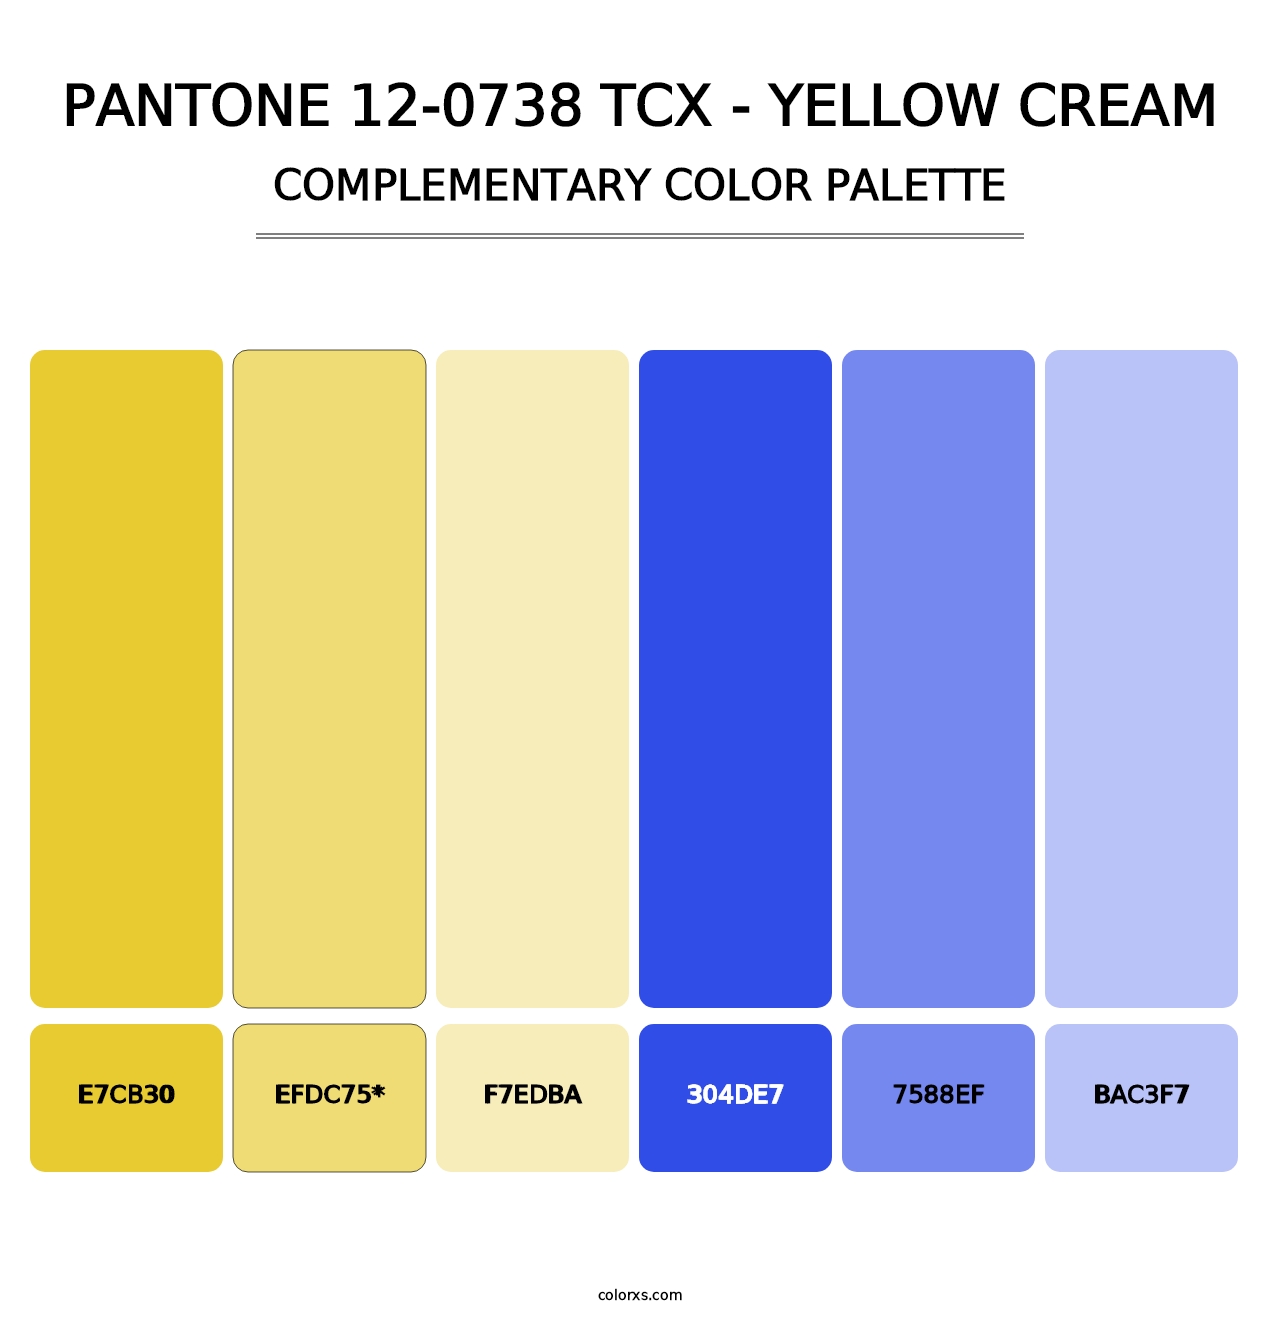 PANTONE 12-0738 TCX - Yellow Cream - Complementary Color Palette